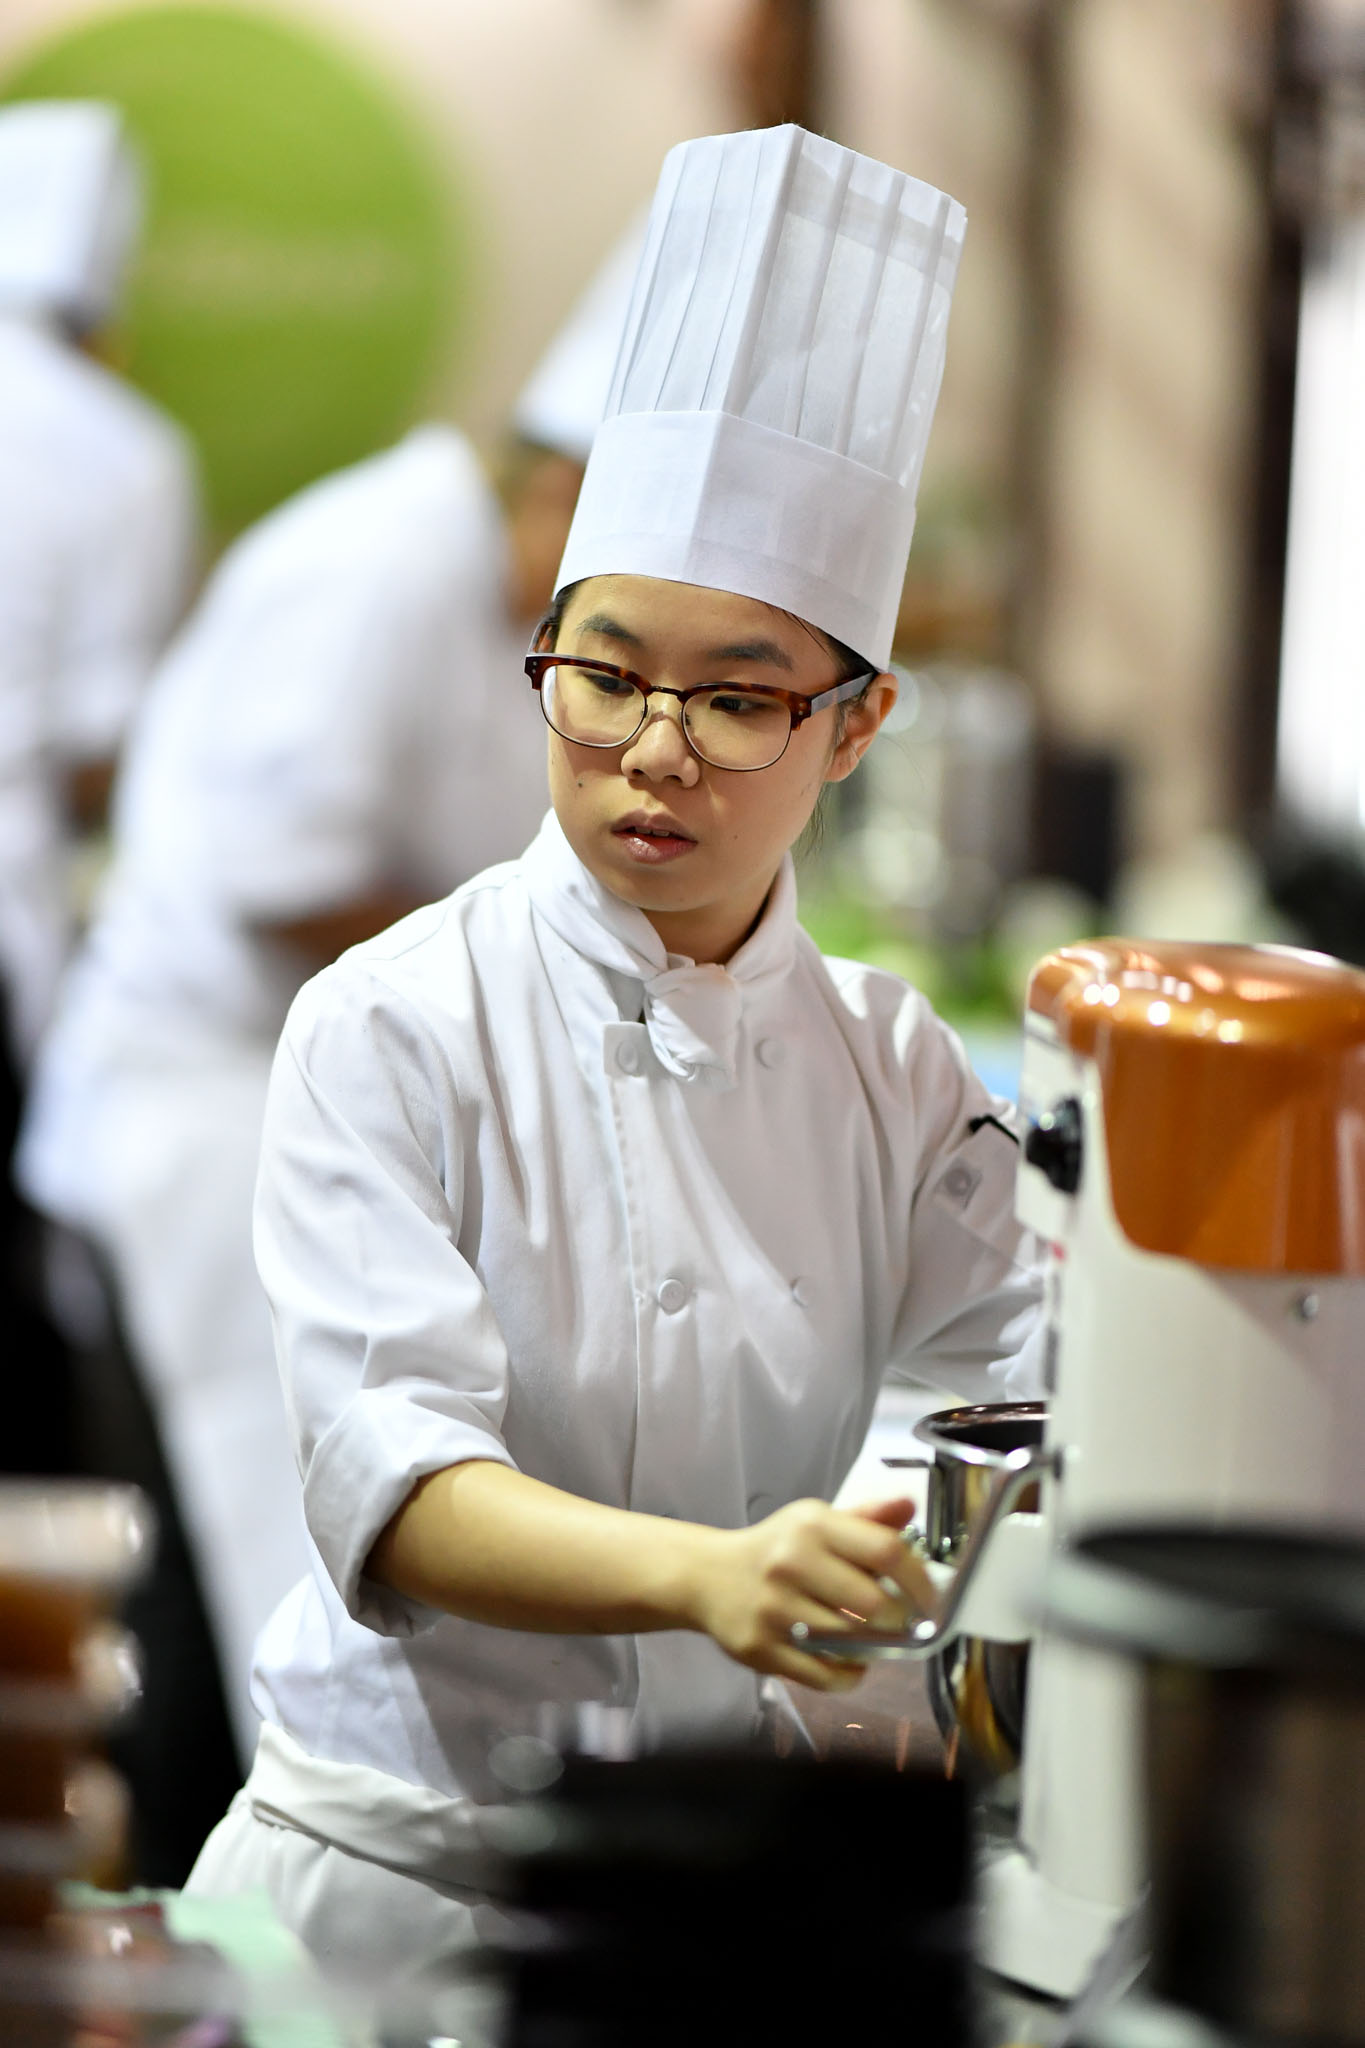 Melbourne, 30 May 2017 - Kimberly Tang commis chef assisting Daniel Soto of the Montague Hotel in South Melbourne in action at the Australian selection trials of the Bocuse d'Or culinary competition held during the Food Service Australia show at the Royal Exhibition Building in Melbourne, Australia. Photo Sydney Low